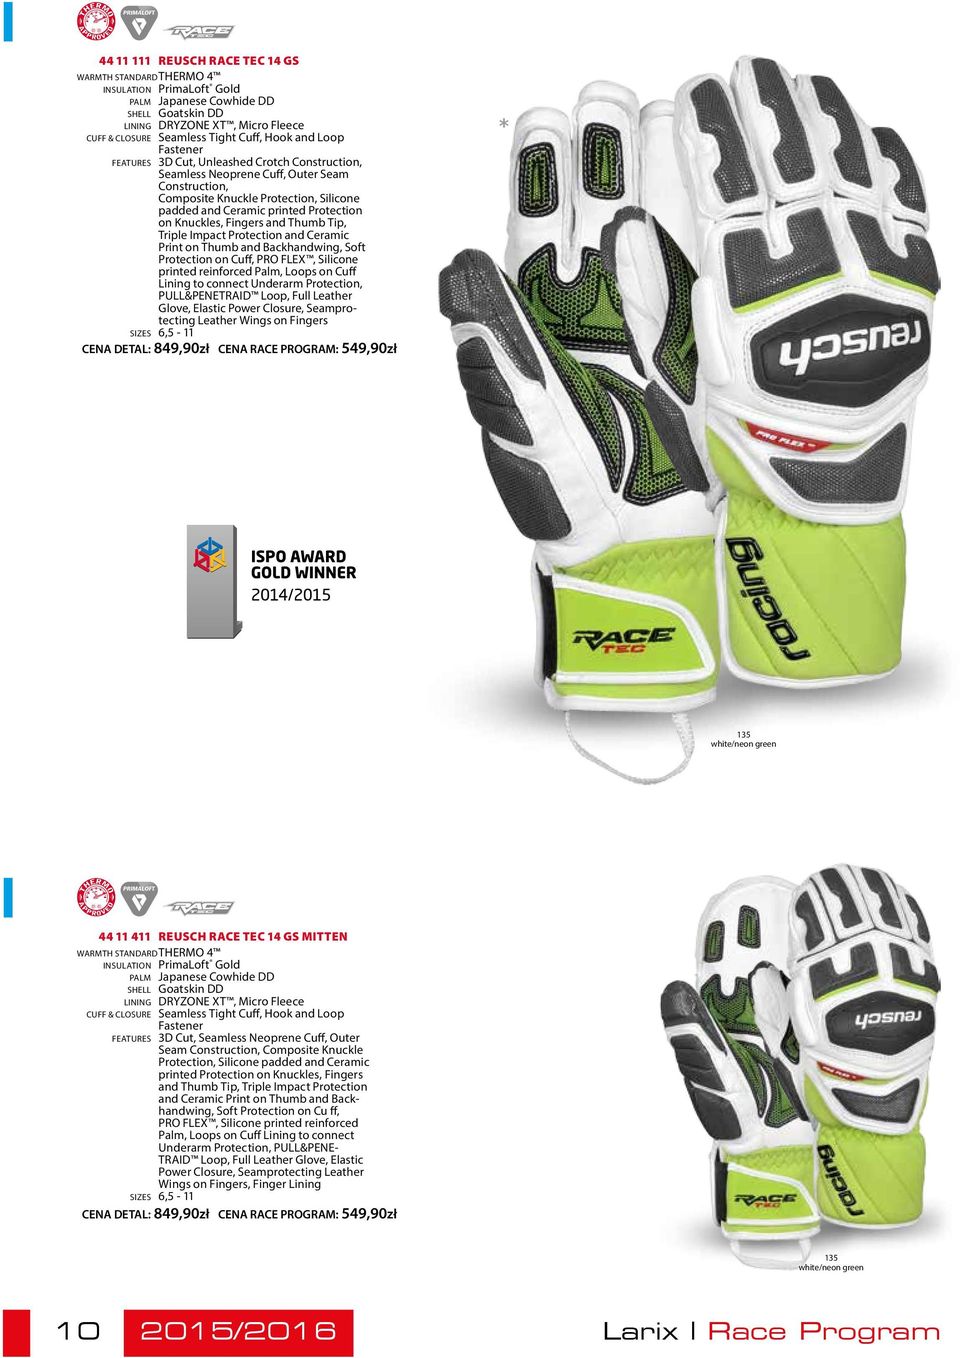 printed Protection on Knuckles, Fingers and Thumb Tip, Triple Impact Protection and Ceramic Print on Thumb and Backhandwing, Soft Protection on Cuff, PRO FLEX, Silicone printed reinforced Palm, Loops